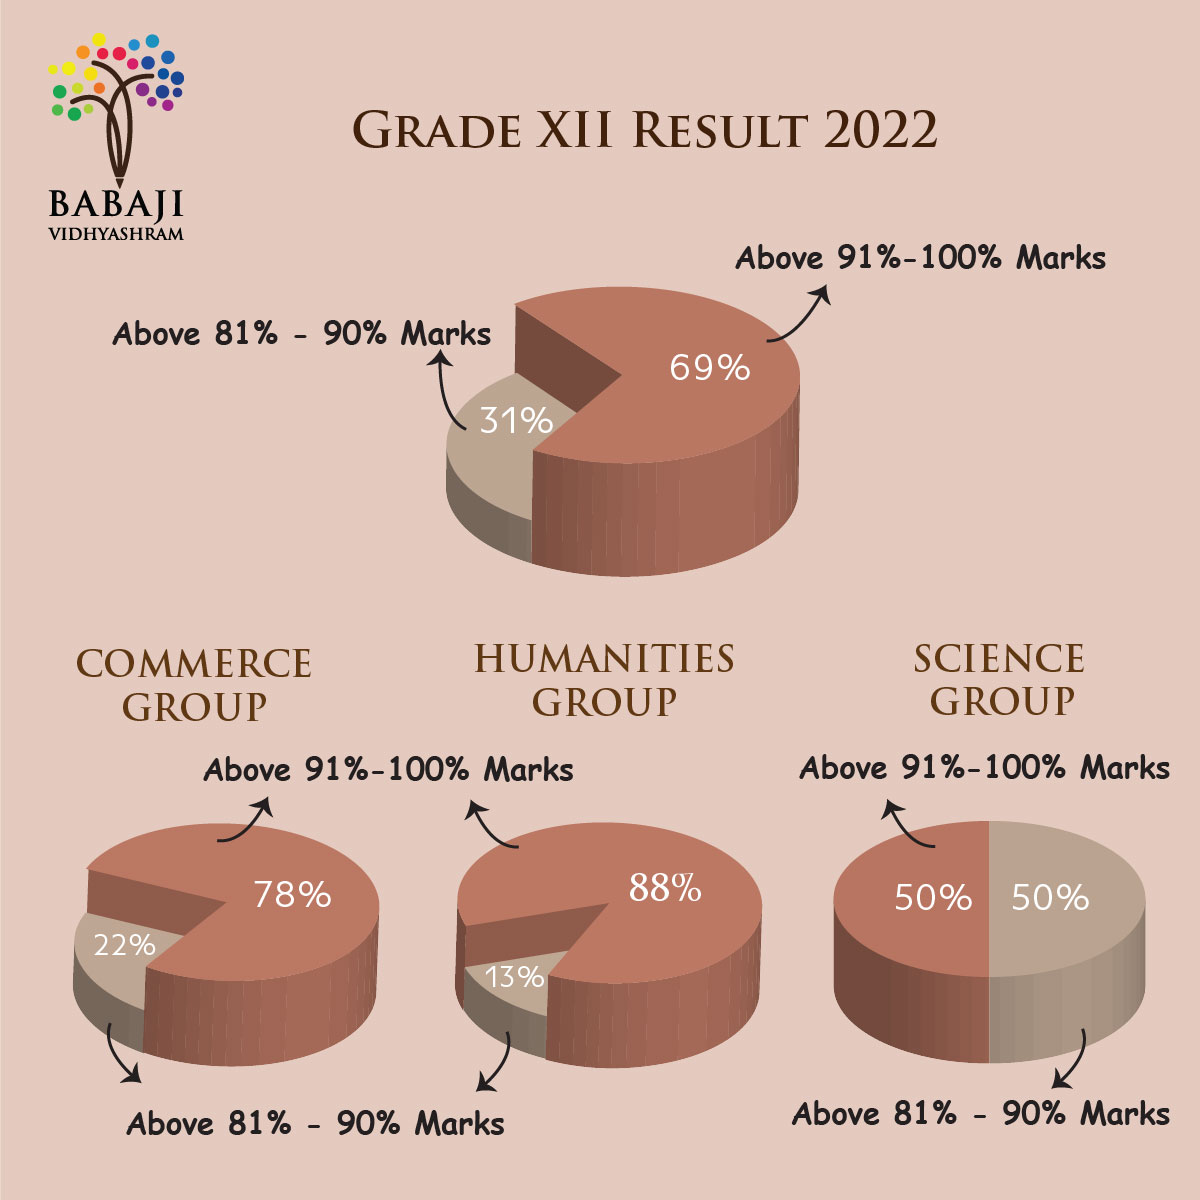 infographics to explain 2022 grade 12 results of Babaji Vidyashram with all students - 59% scoring above 90%, 29% scoring above 80% and 12%, above 70% in 3D pie chart placed centre top, 70% of Science group children scoring above 90% and 30% scoring above 80%, pie chart placed bottom right , 57.1% of Commerce group gaining above 90%, 14.3% in 80% mark range and the rest in 28.6% range piechart placed bottom left.